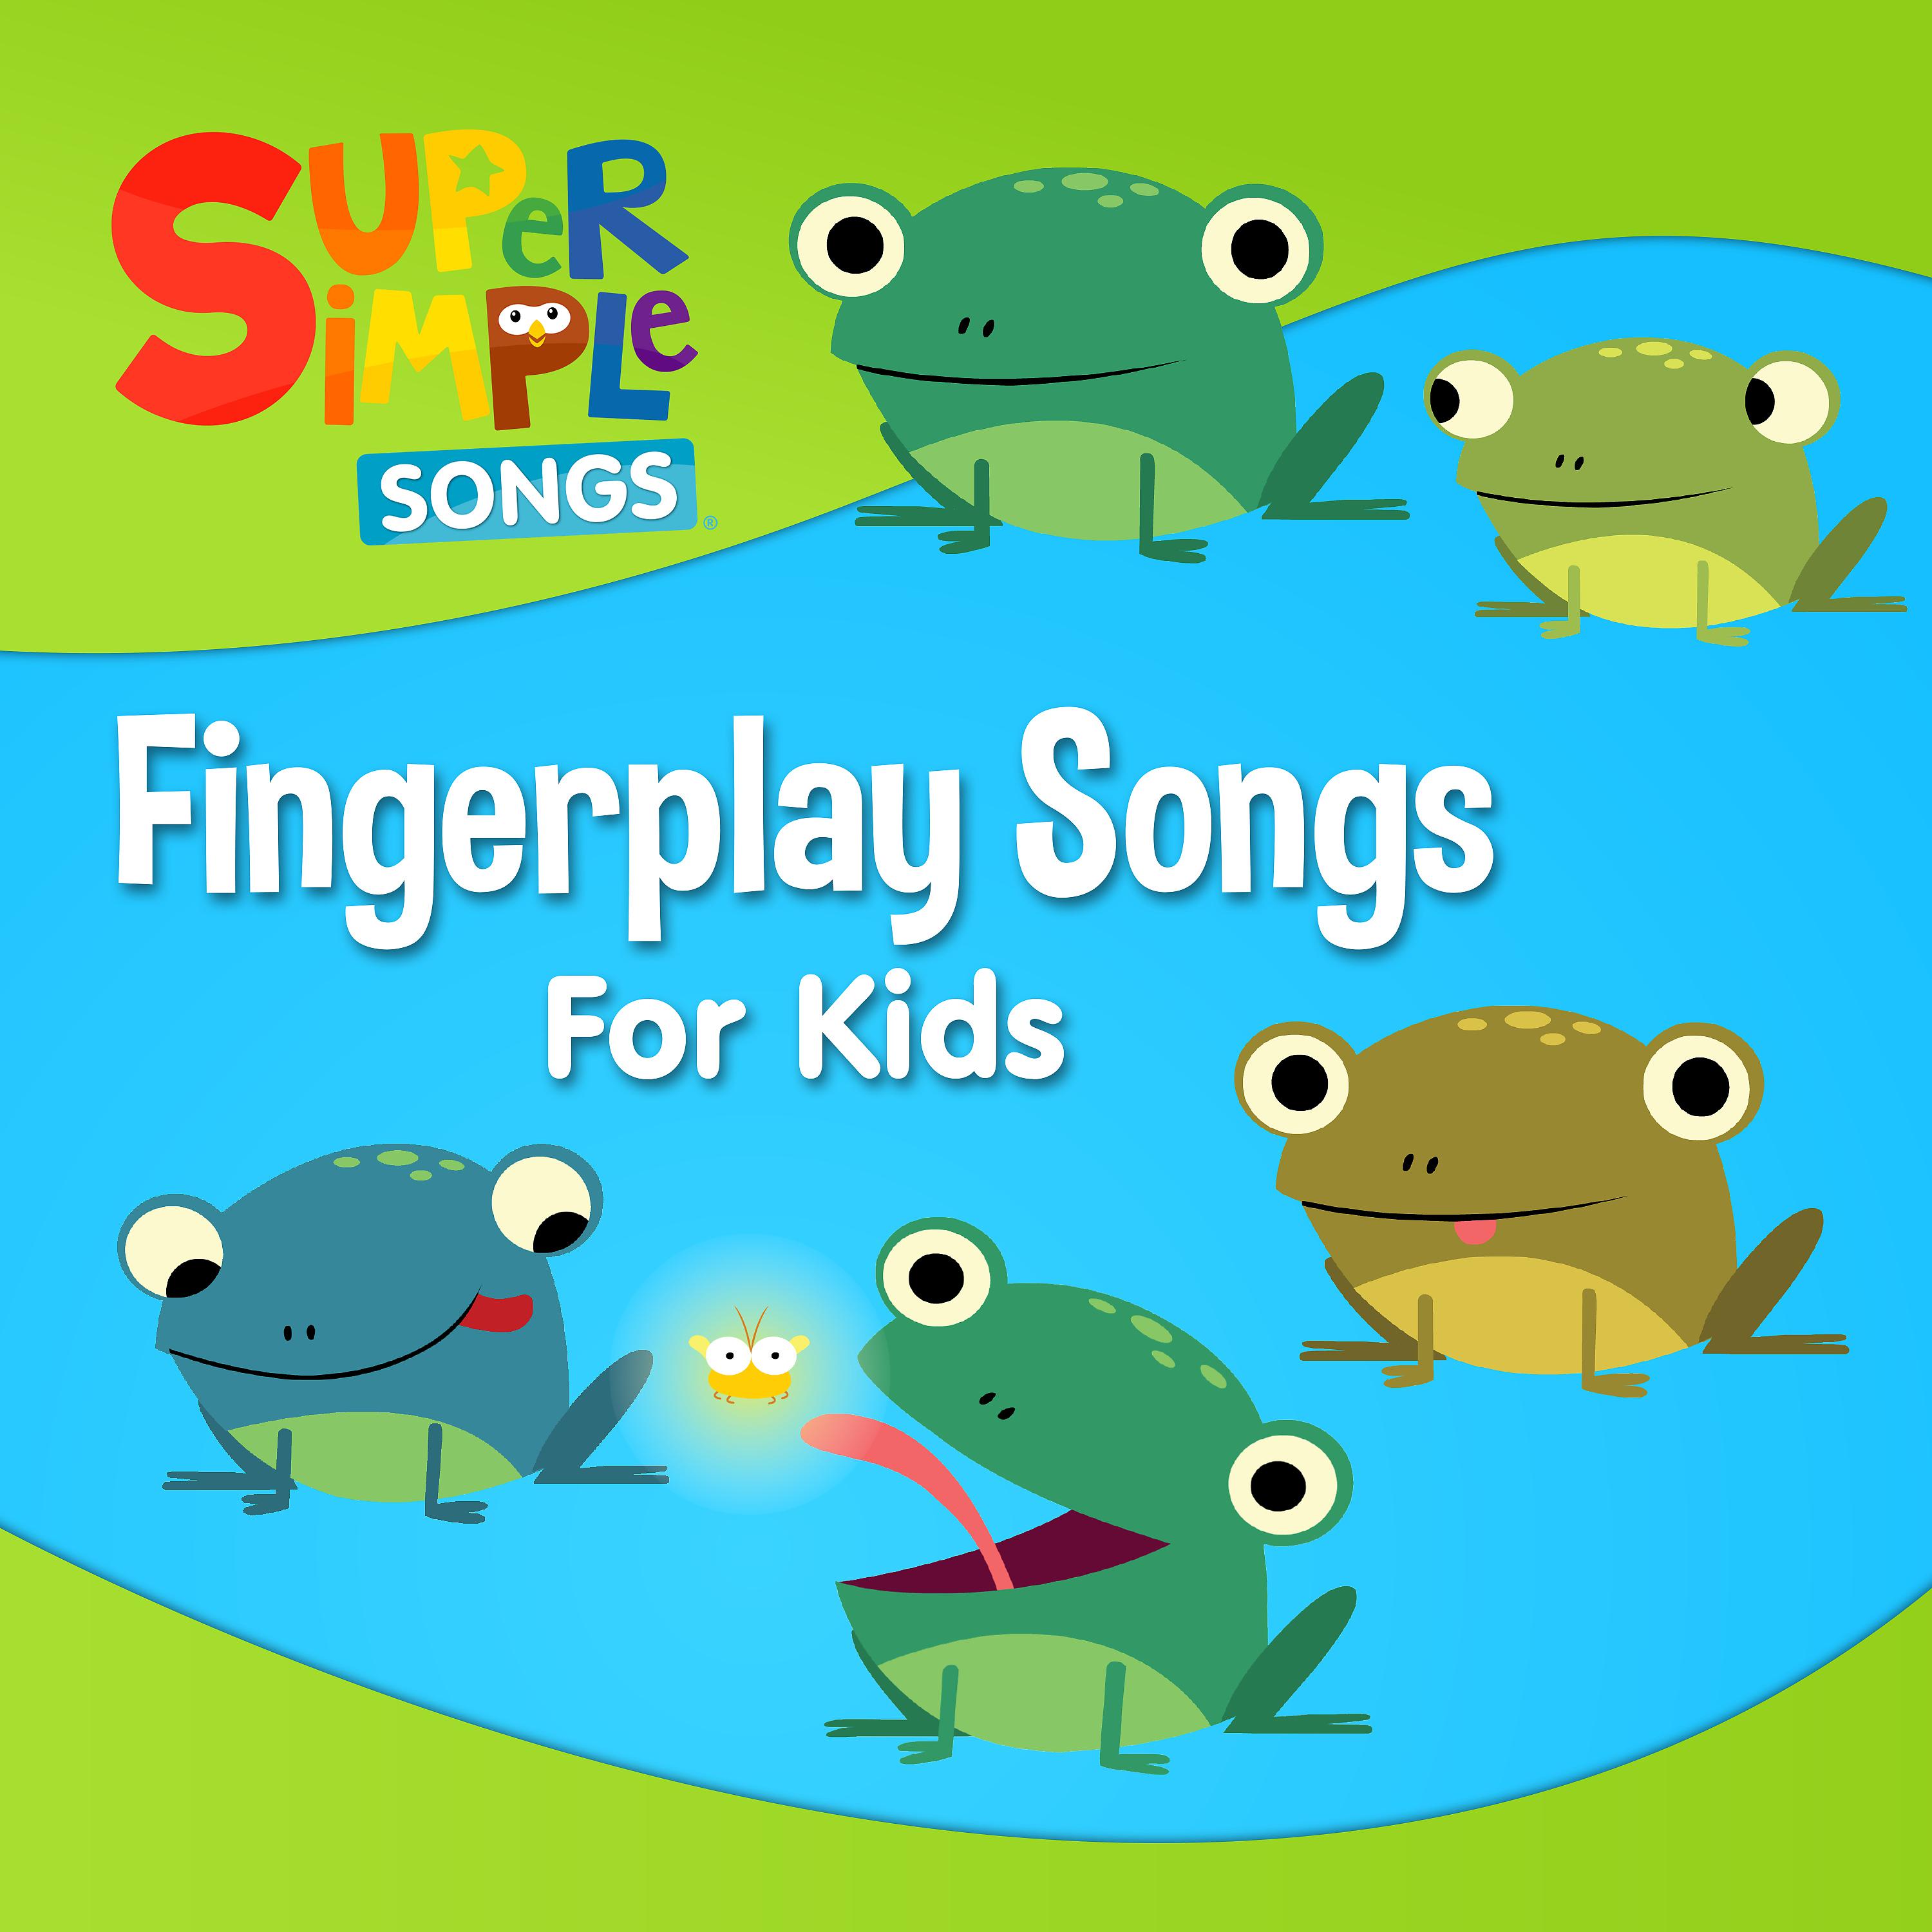 Super simple songs baby shark. Five little Baby Sharks. Itsy Bitsy Spider super simple Songs. Super simple Songs. Super simple Songs Kids Songs.